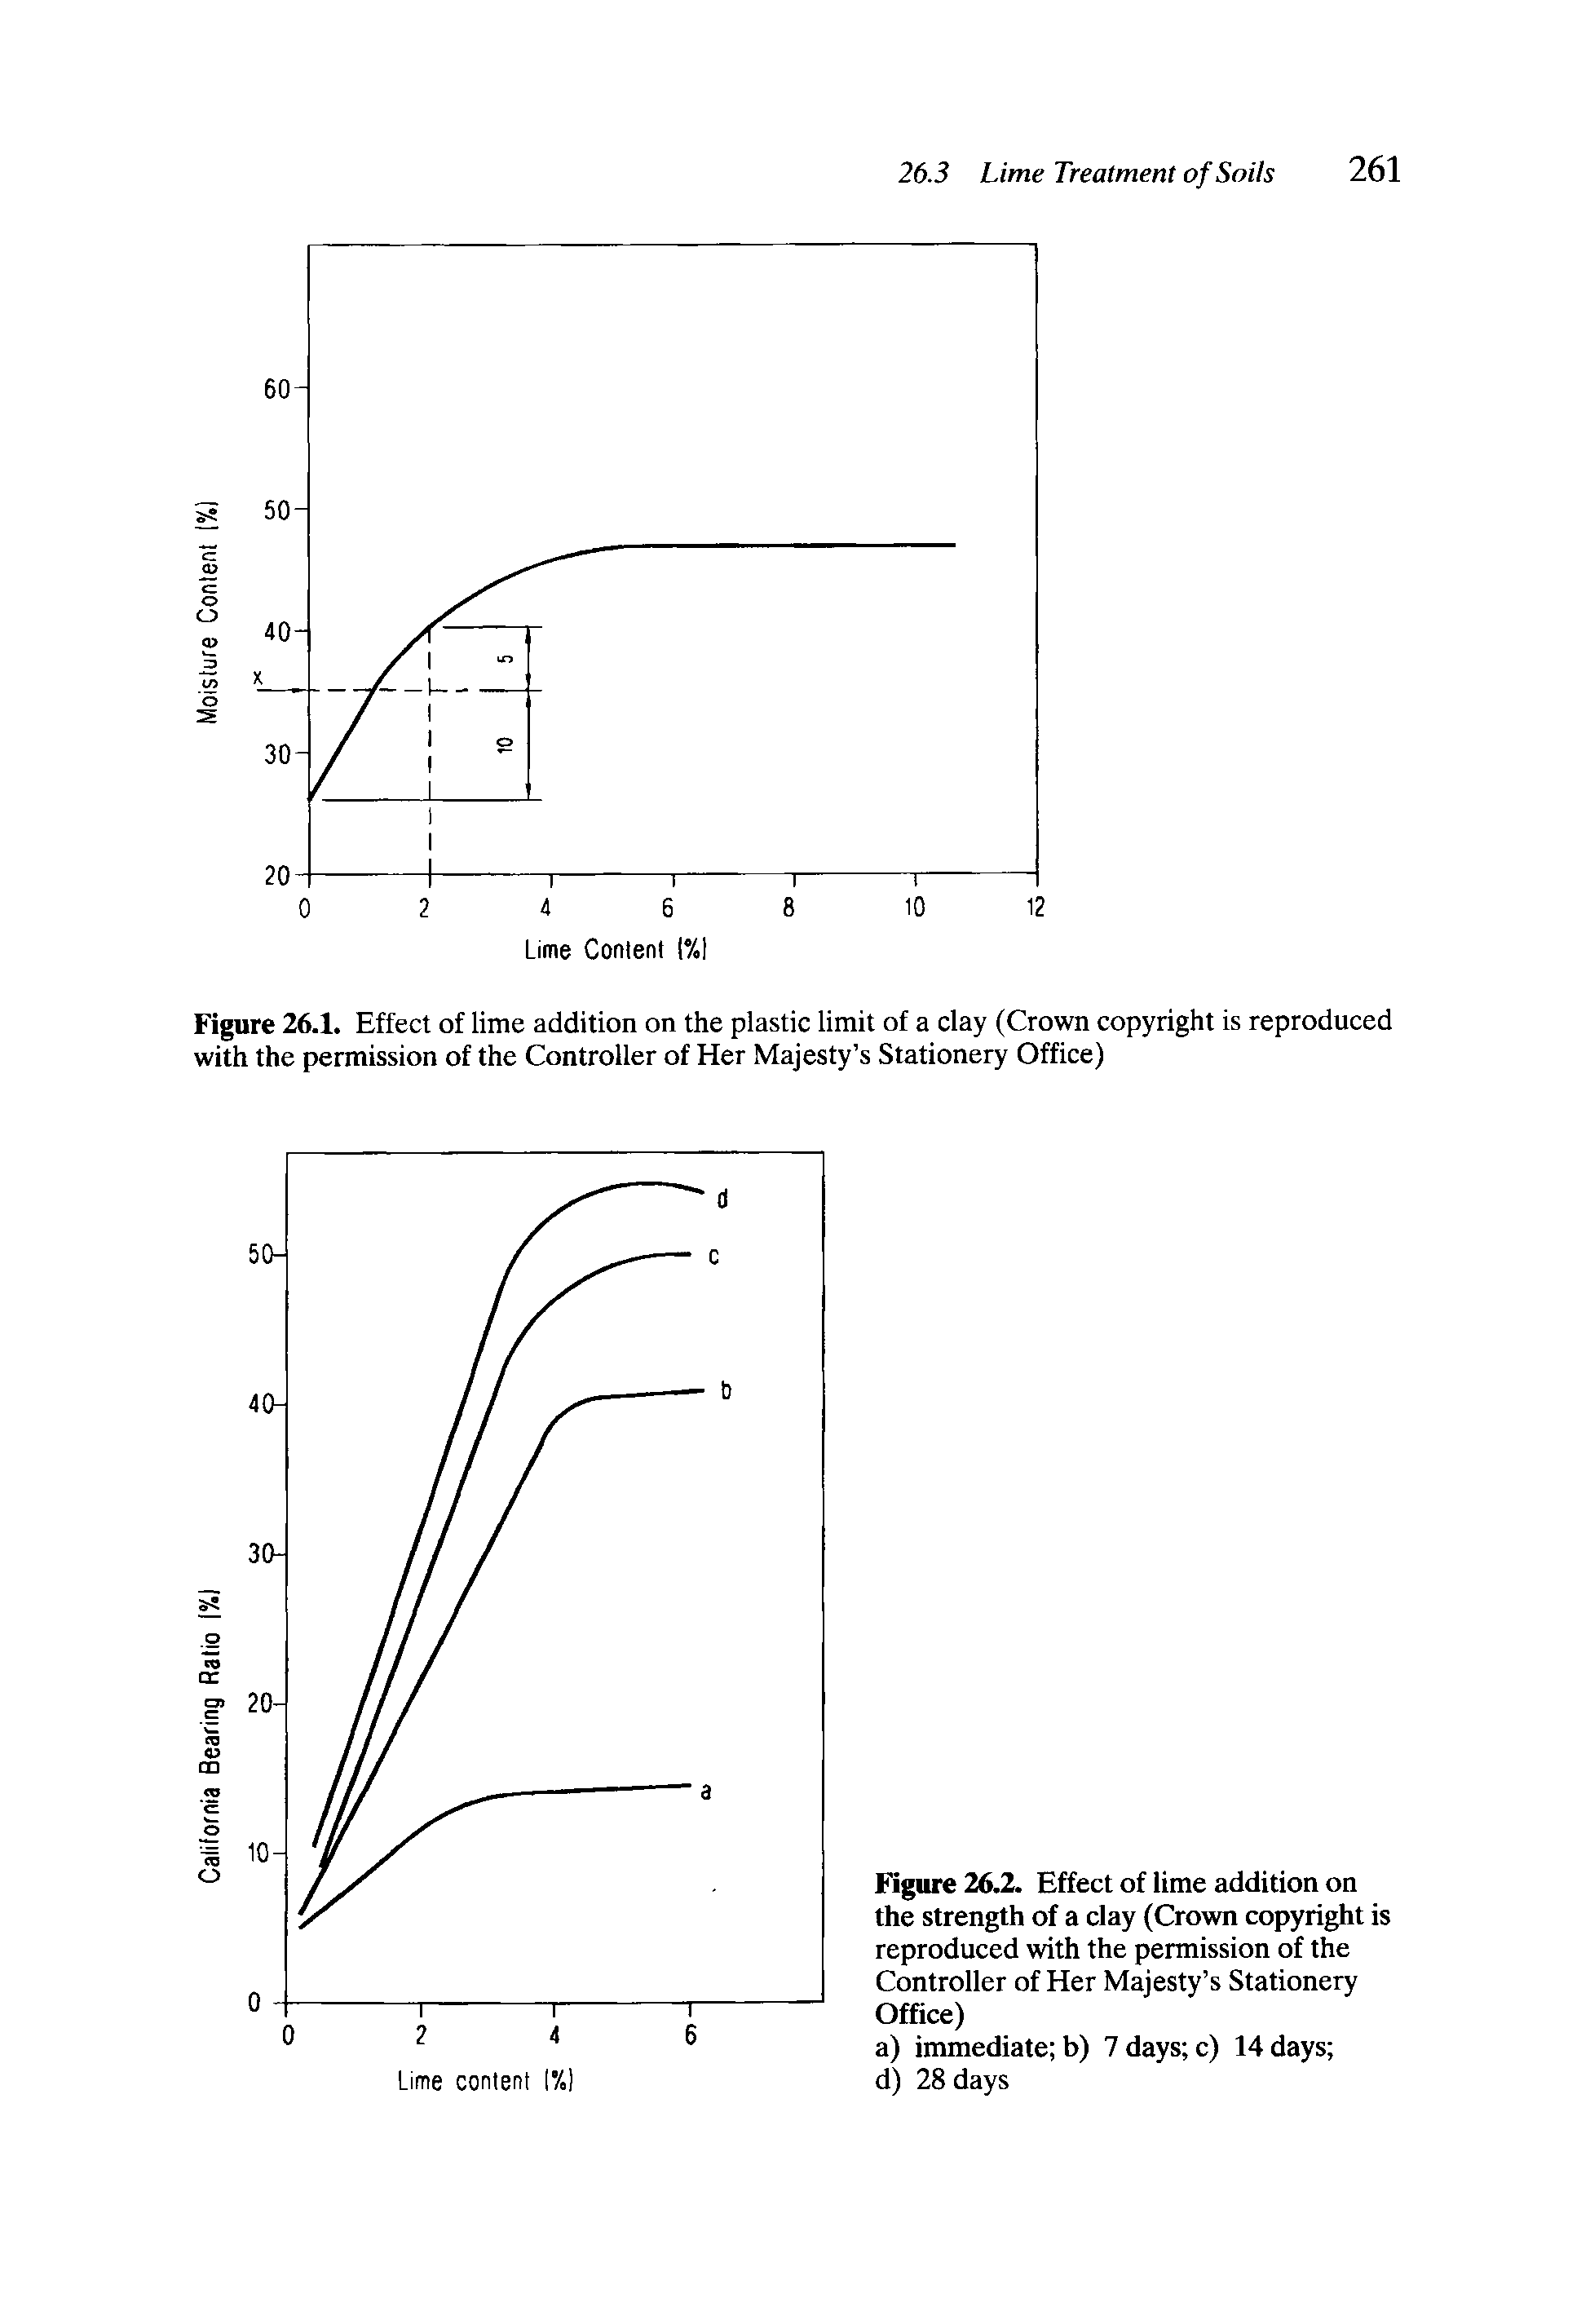 Figure 26.1. Effect of lime addition on the plastic limit of a clay (Crown copyright is reproduced with the permission of the Controller of Her Majesty s Stationery Office)...